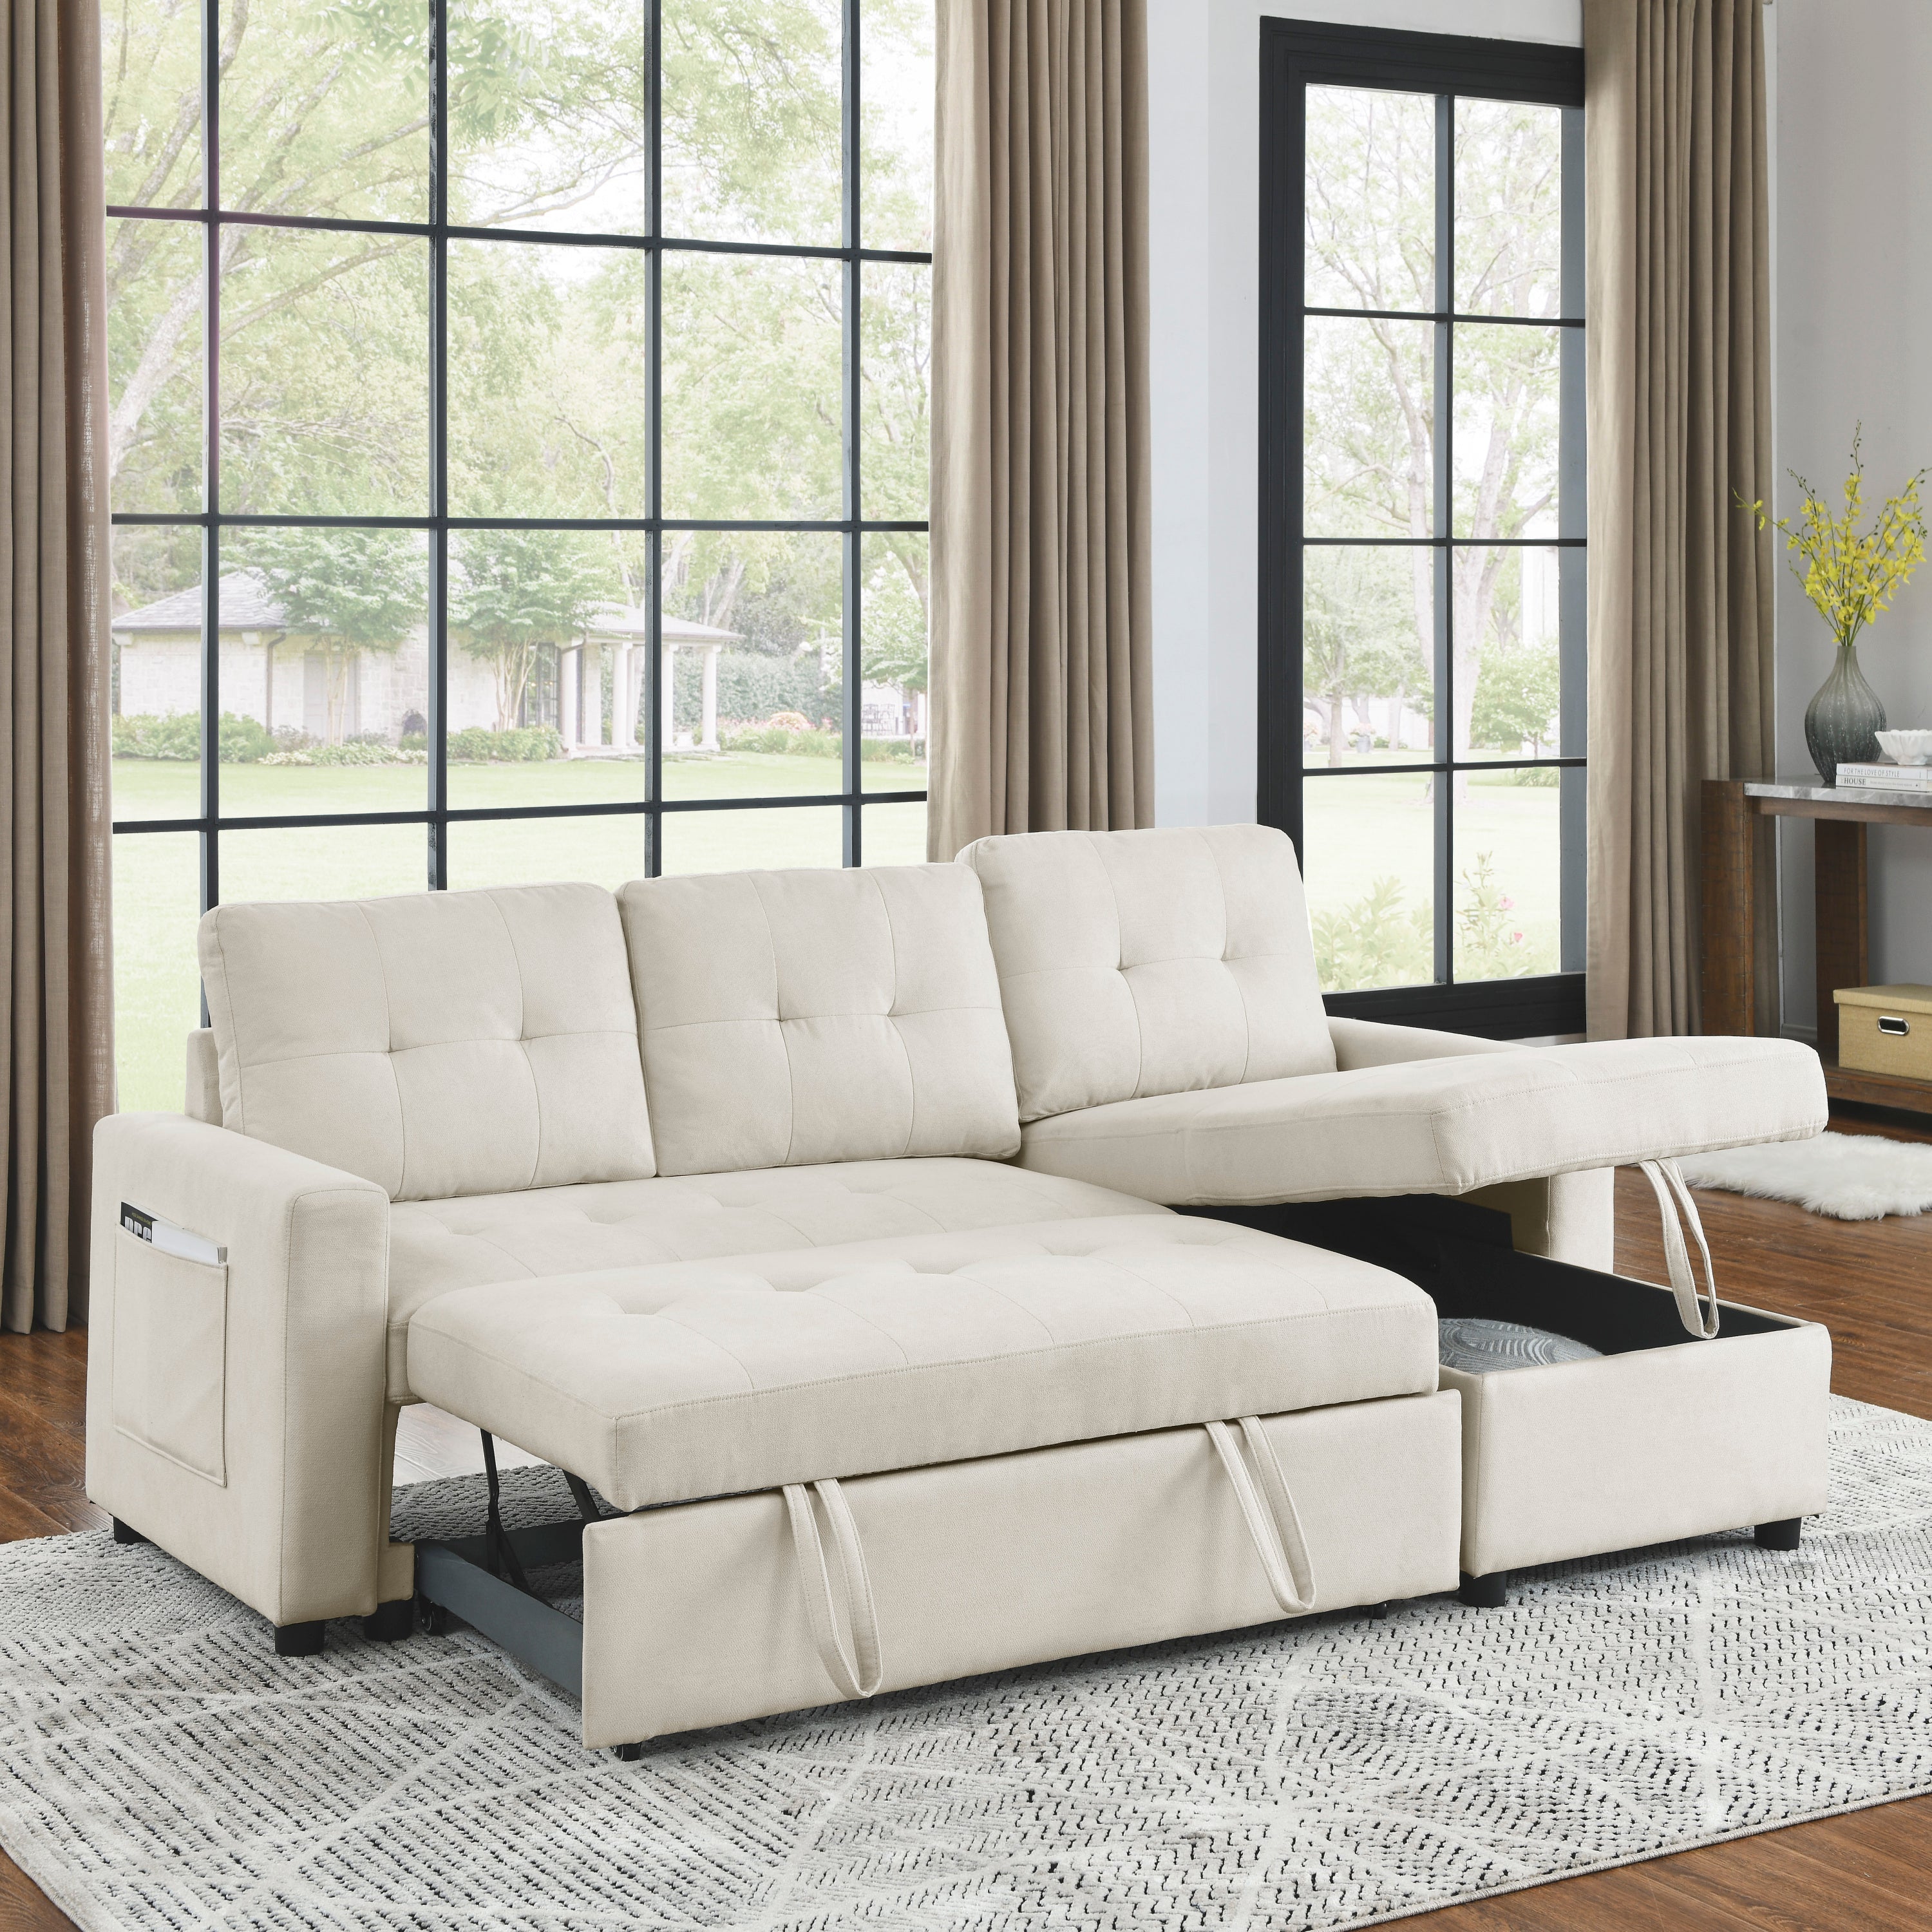 🆓🚛 78.5" Sleeper Sofa Bed Reversible Couch With Storage, Beige